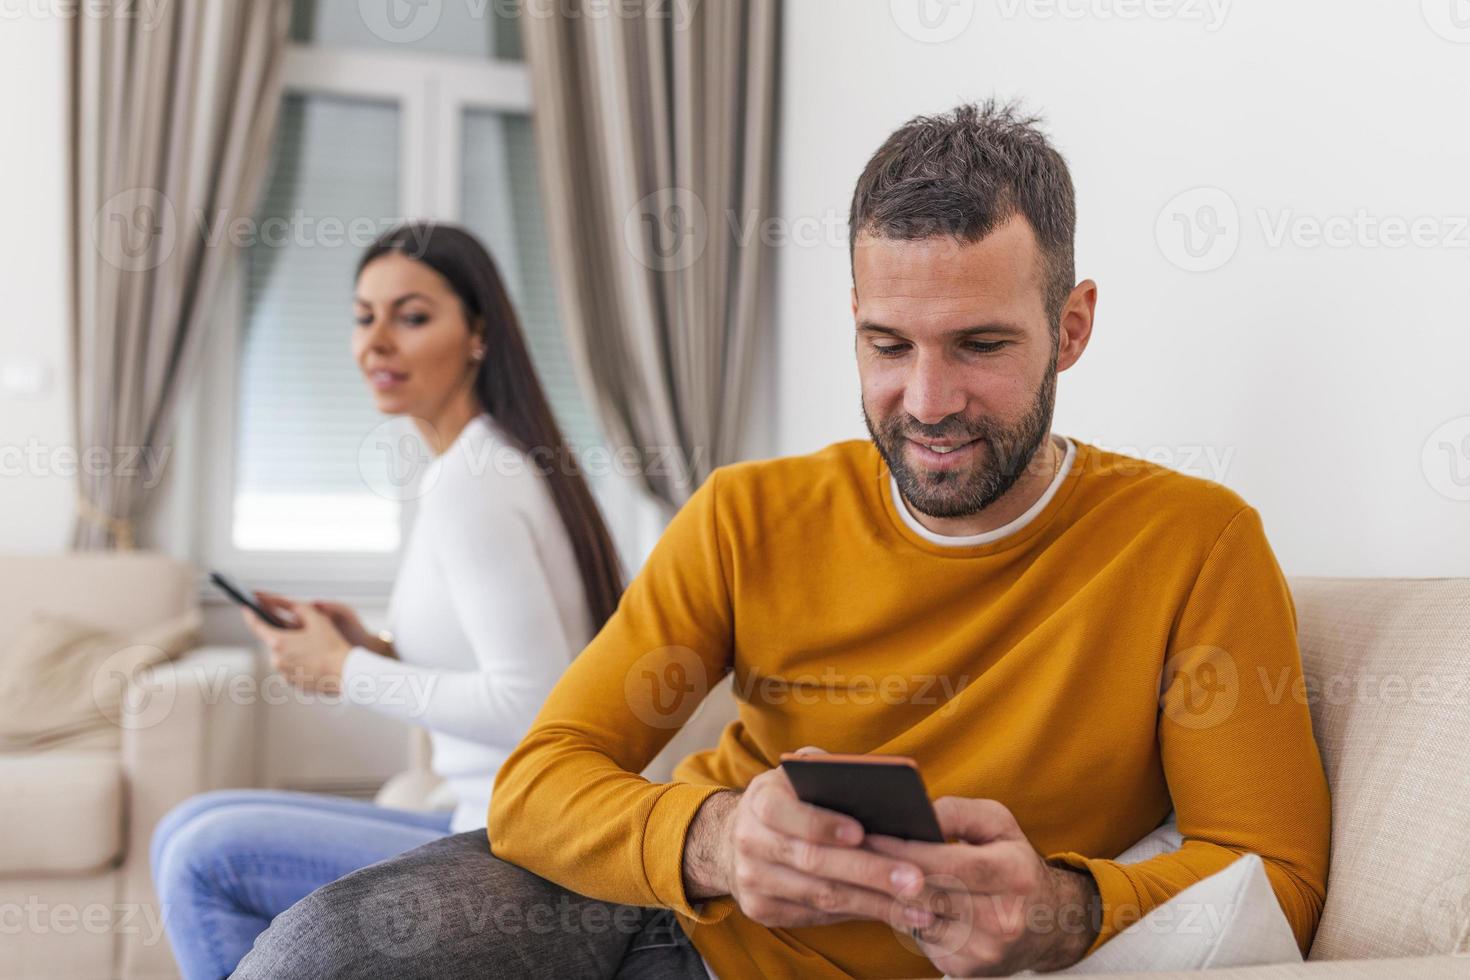 Wife turned her back to husband, reading message on phone from her lover, Man playing games on mobile phone. Cheating and infidelity concept photo